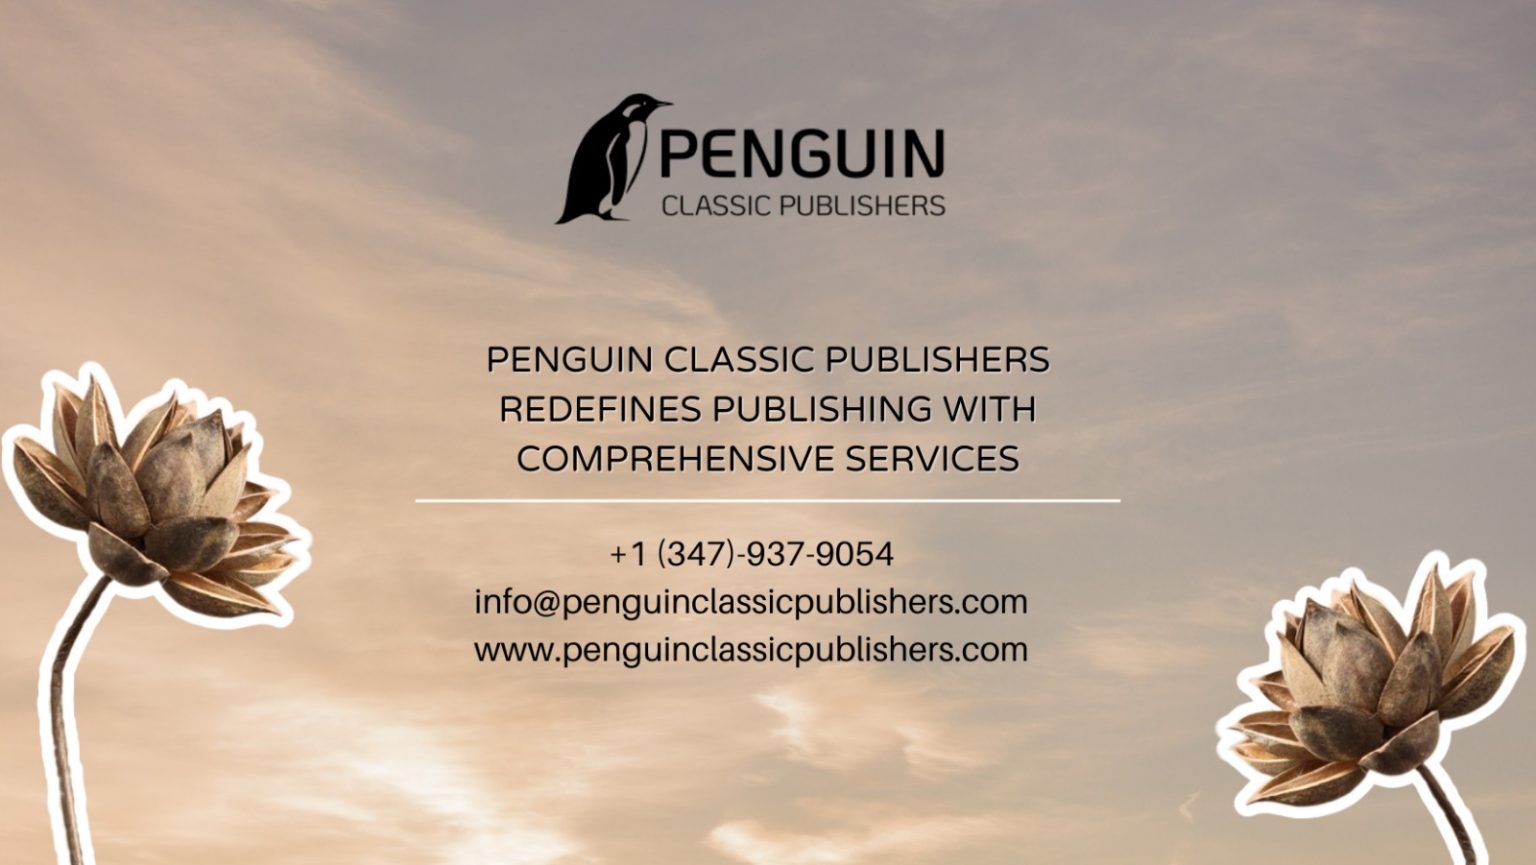 Penguin Classic Publishers: Publishing Excellence with Comprehensive Services